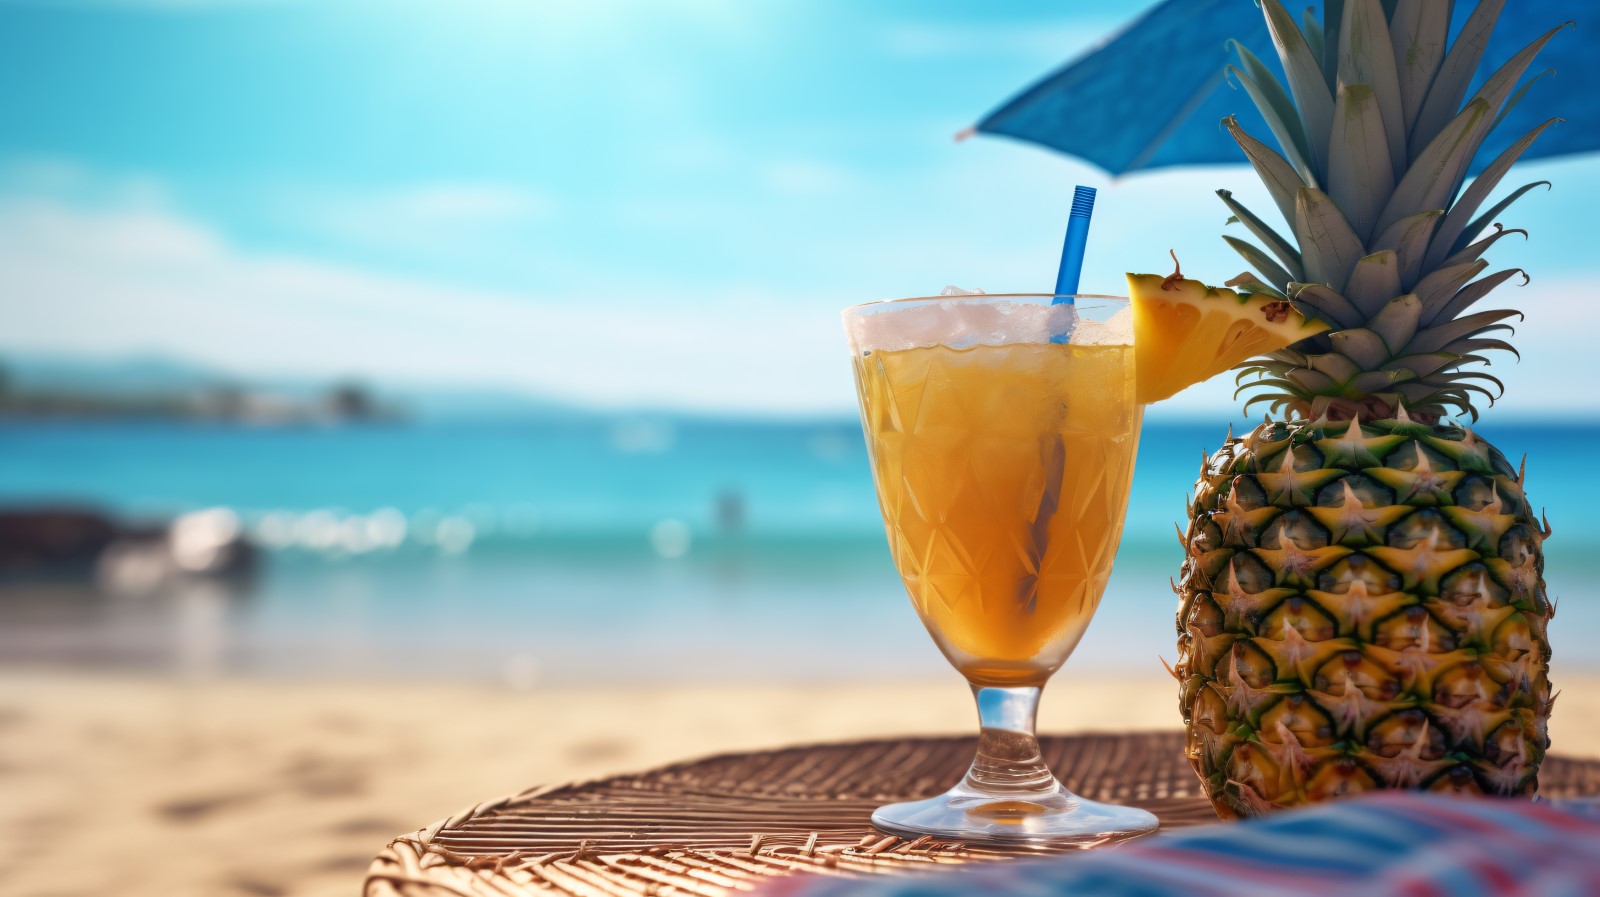 pineapple drink in cocktail glass and sand beach scene 114